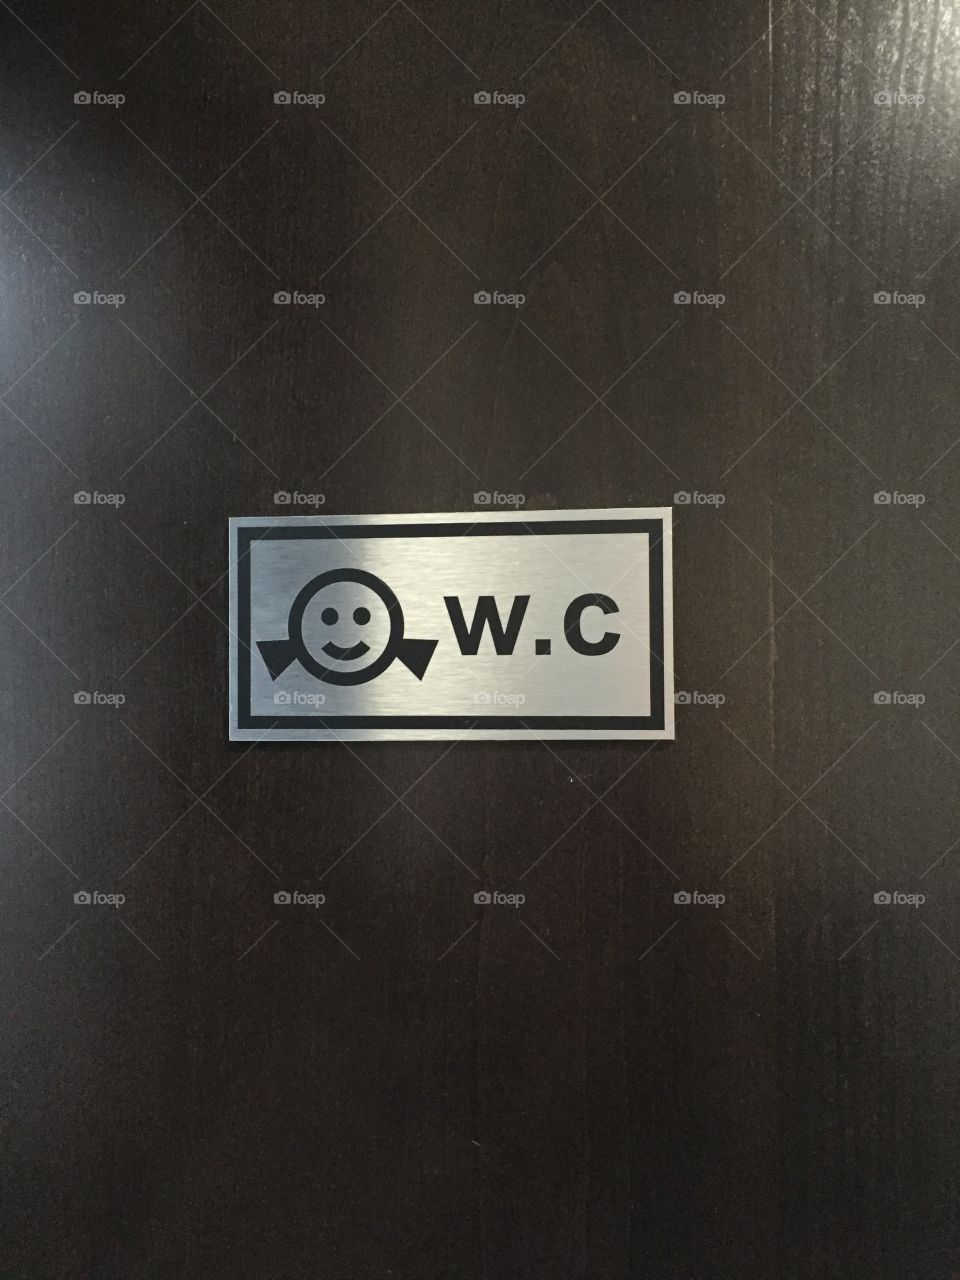 W.C. The most important place to know. 